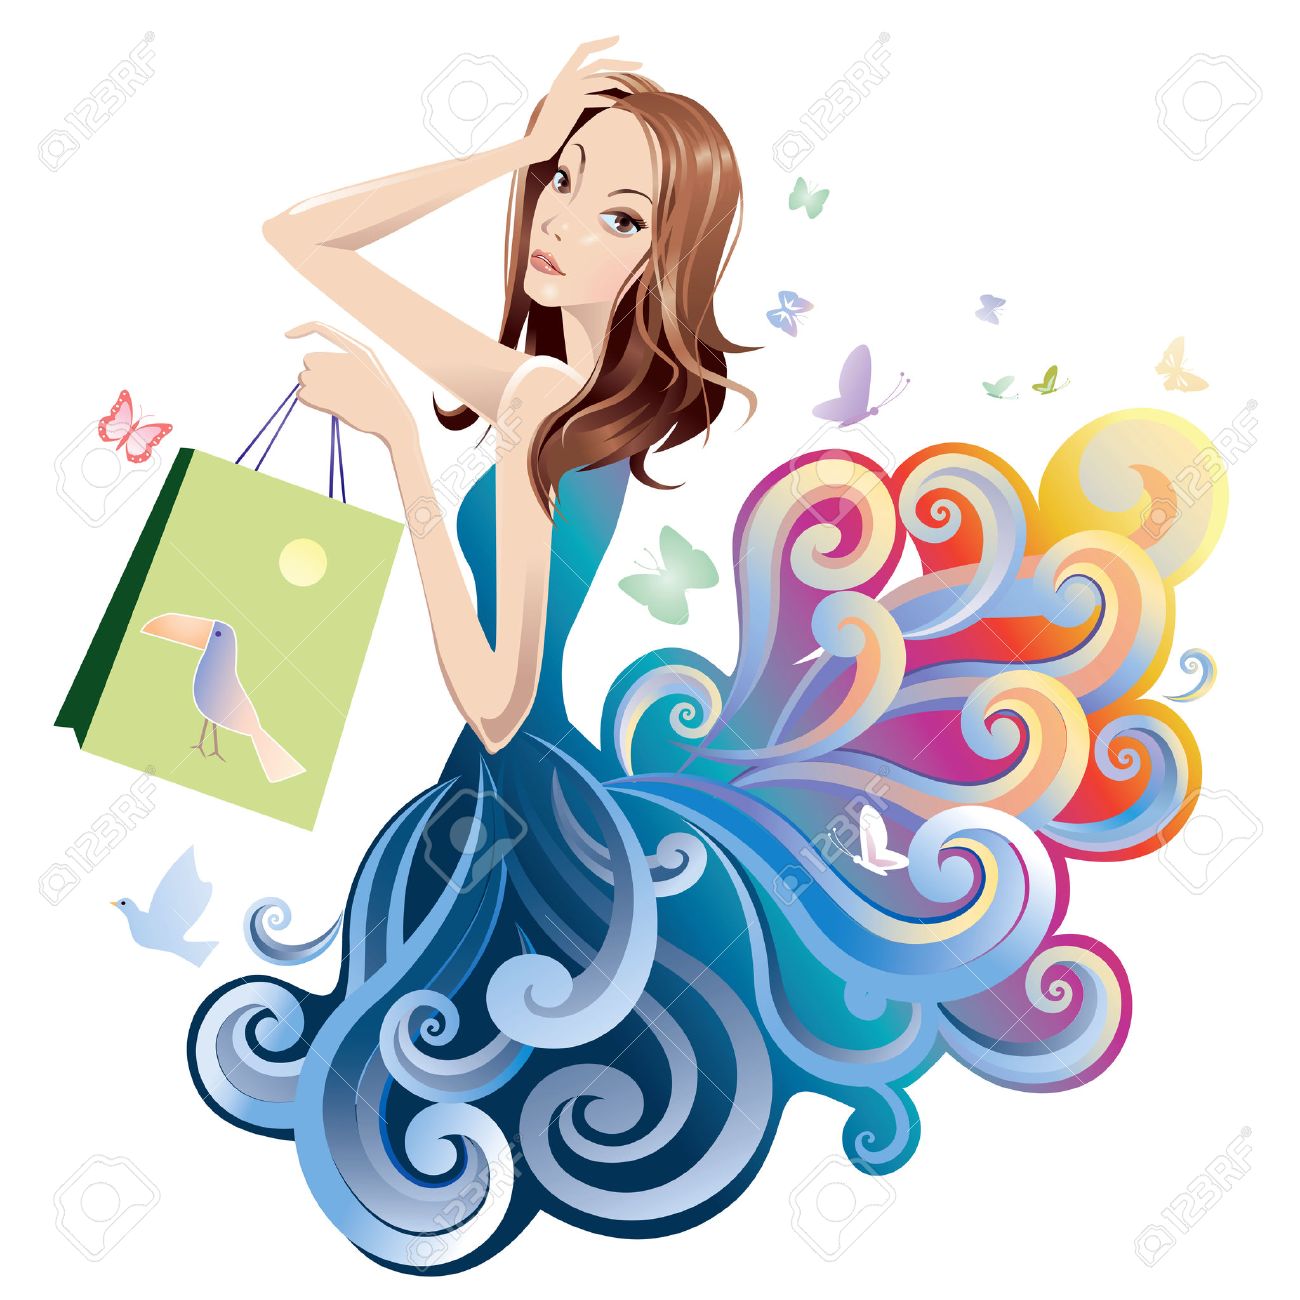 Woman shopping clipart 5 » Clipart Station.